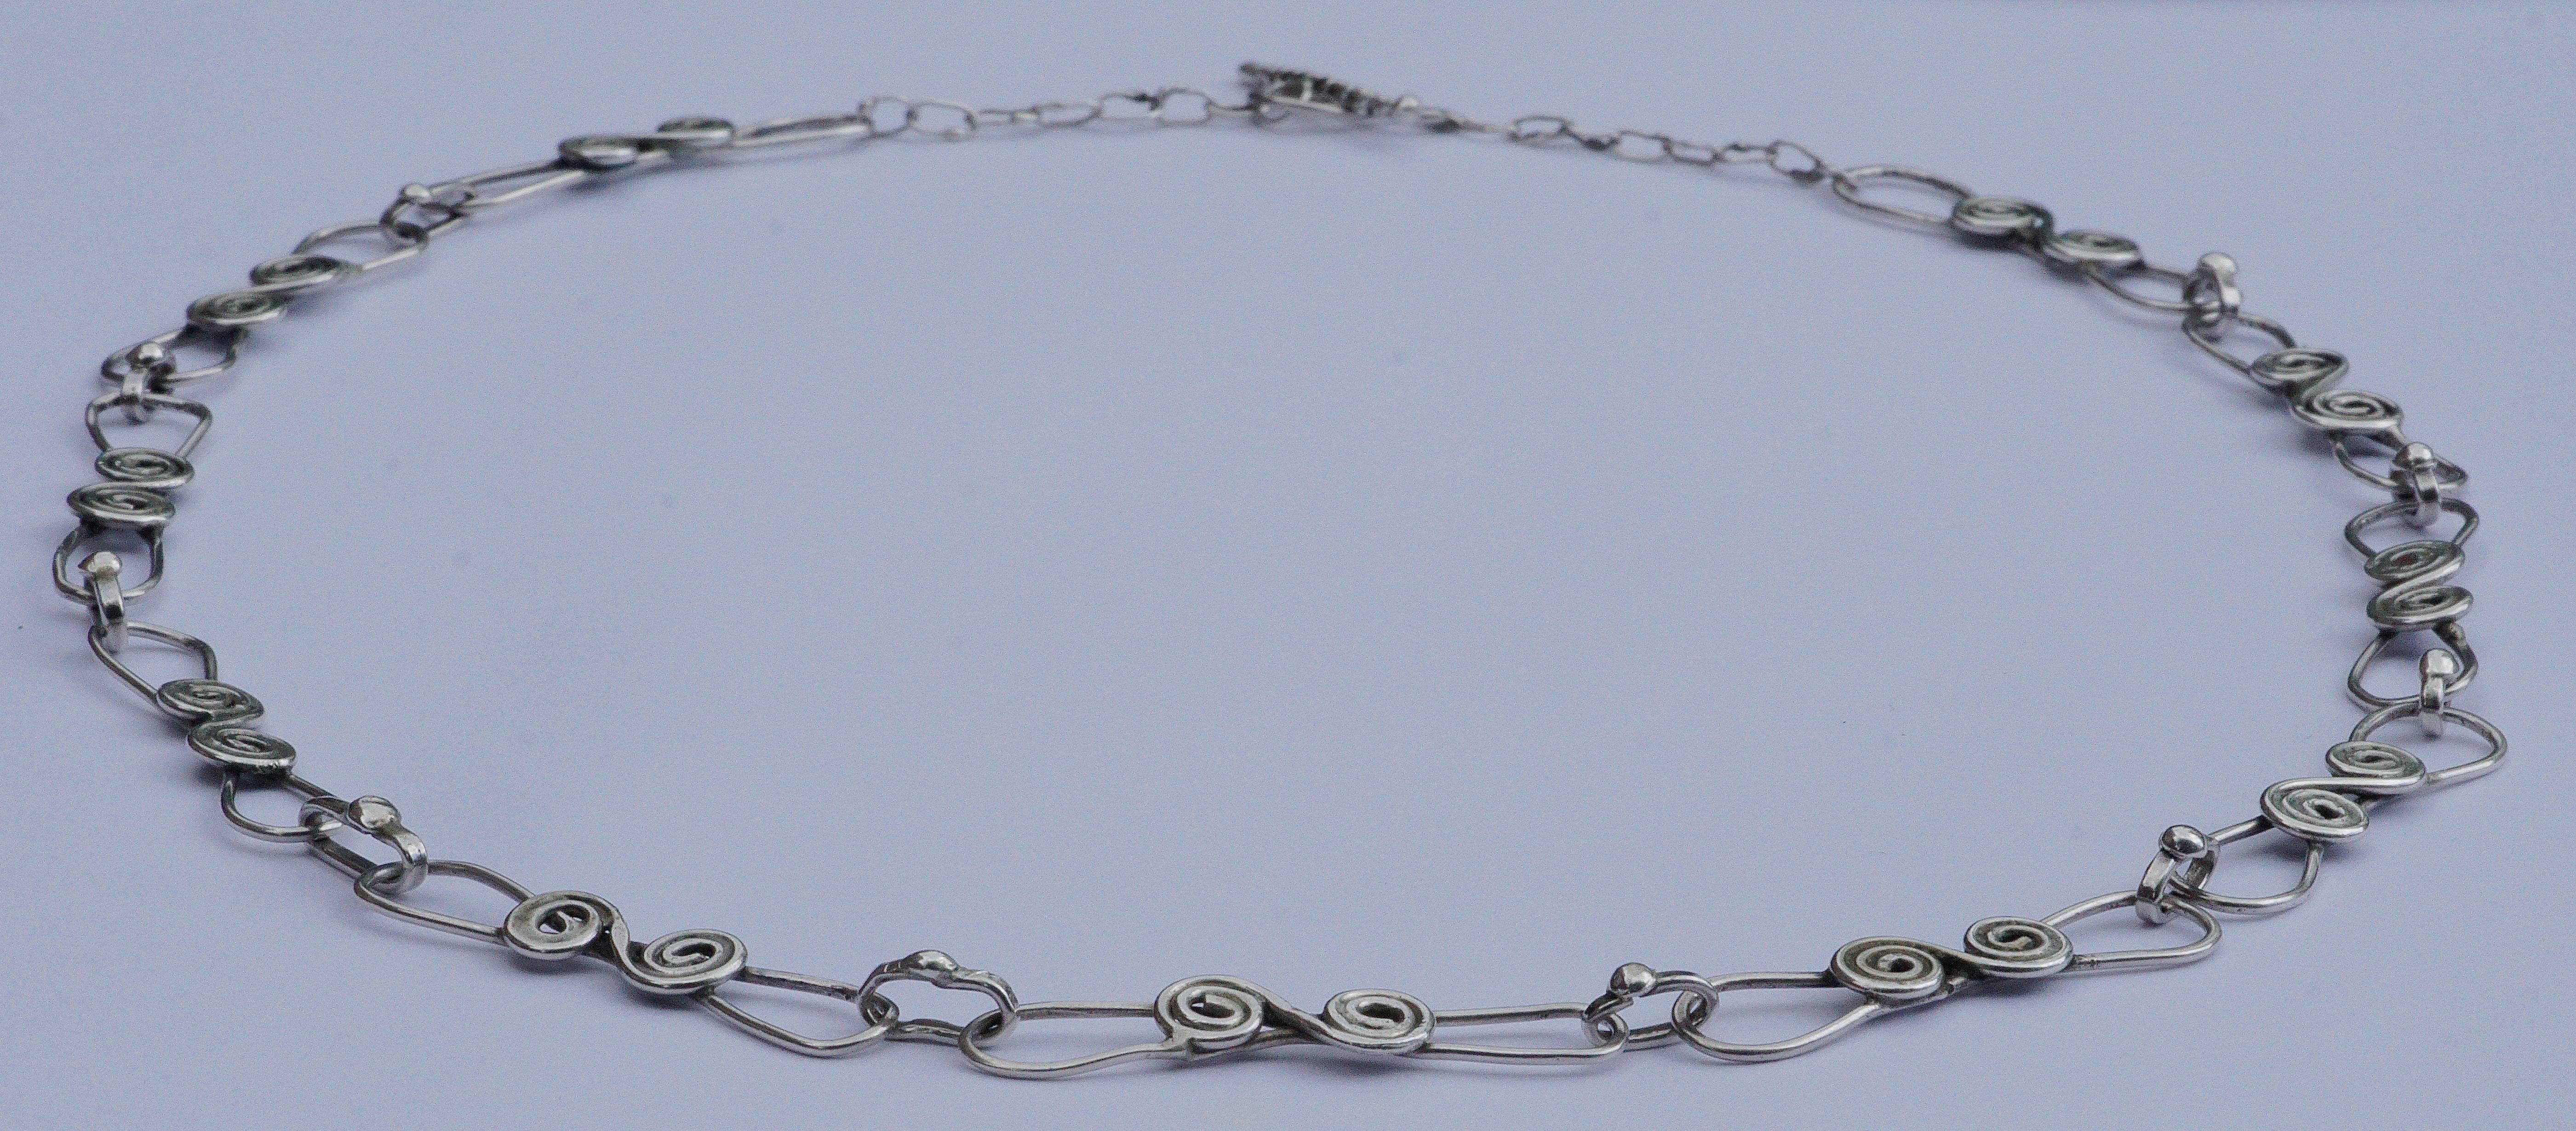 Silver Swirl Hand Forged Link Chain Necklace circa 1970s In Good Condition For Sale In London, GB